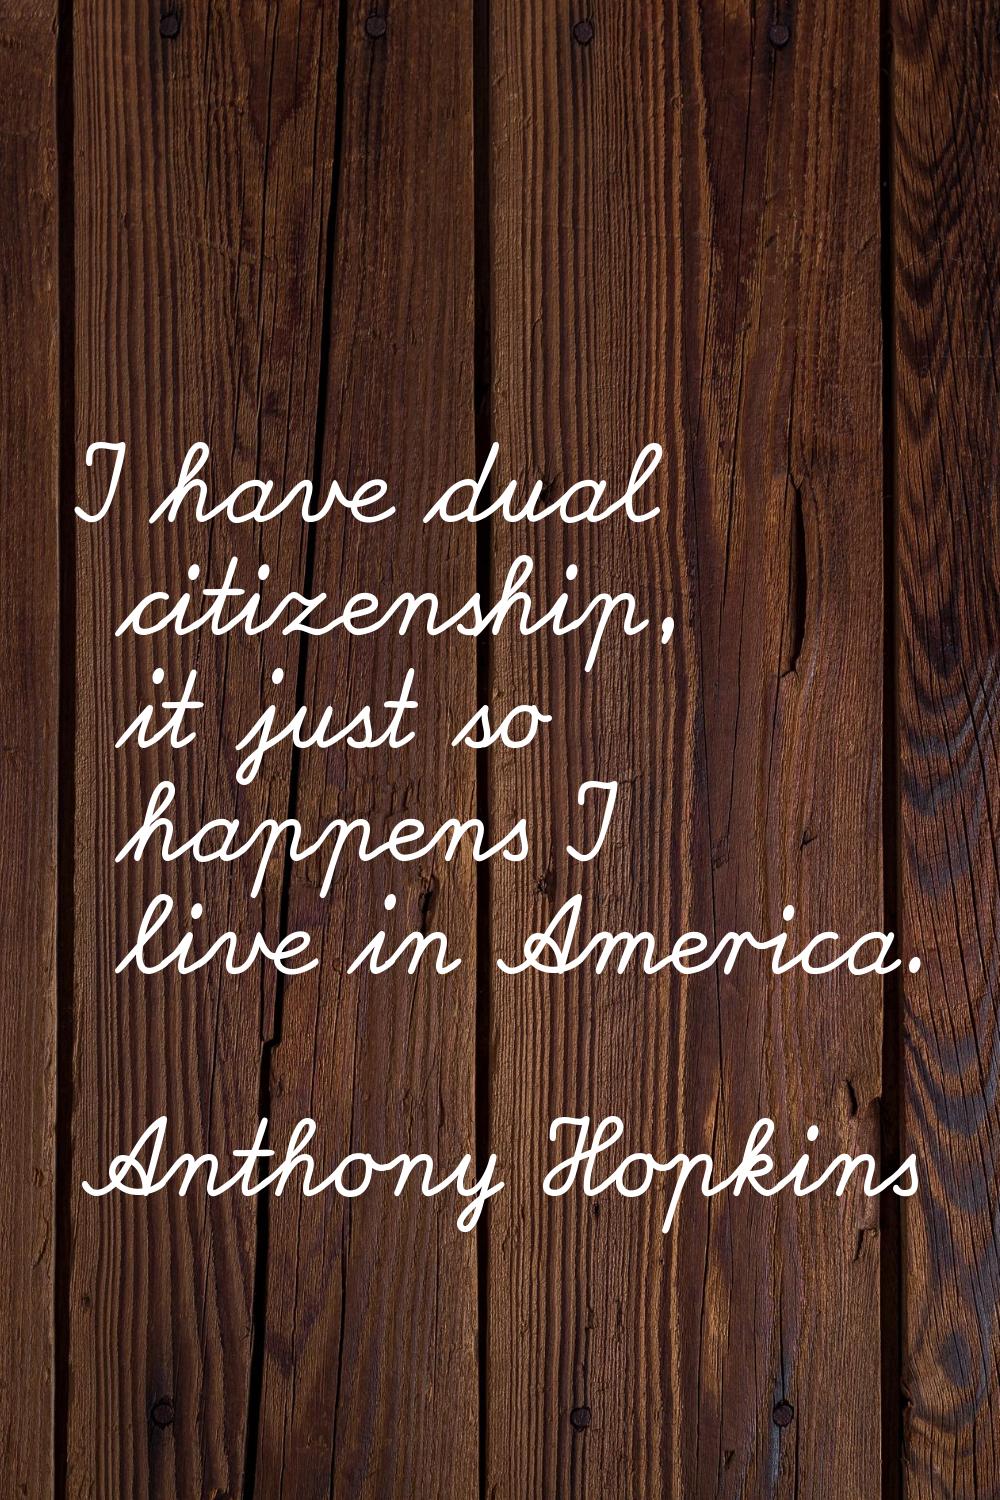 I have dual citizenship, it just so happens I live in America.